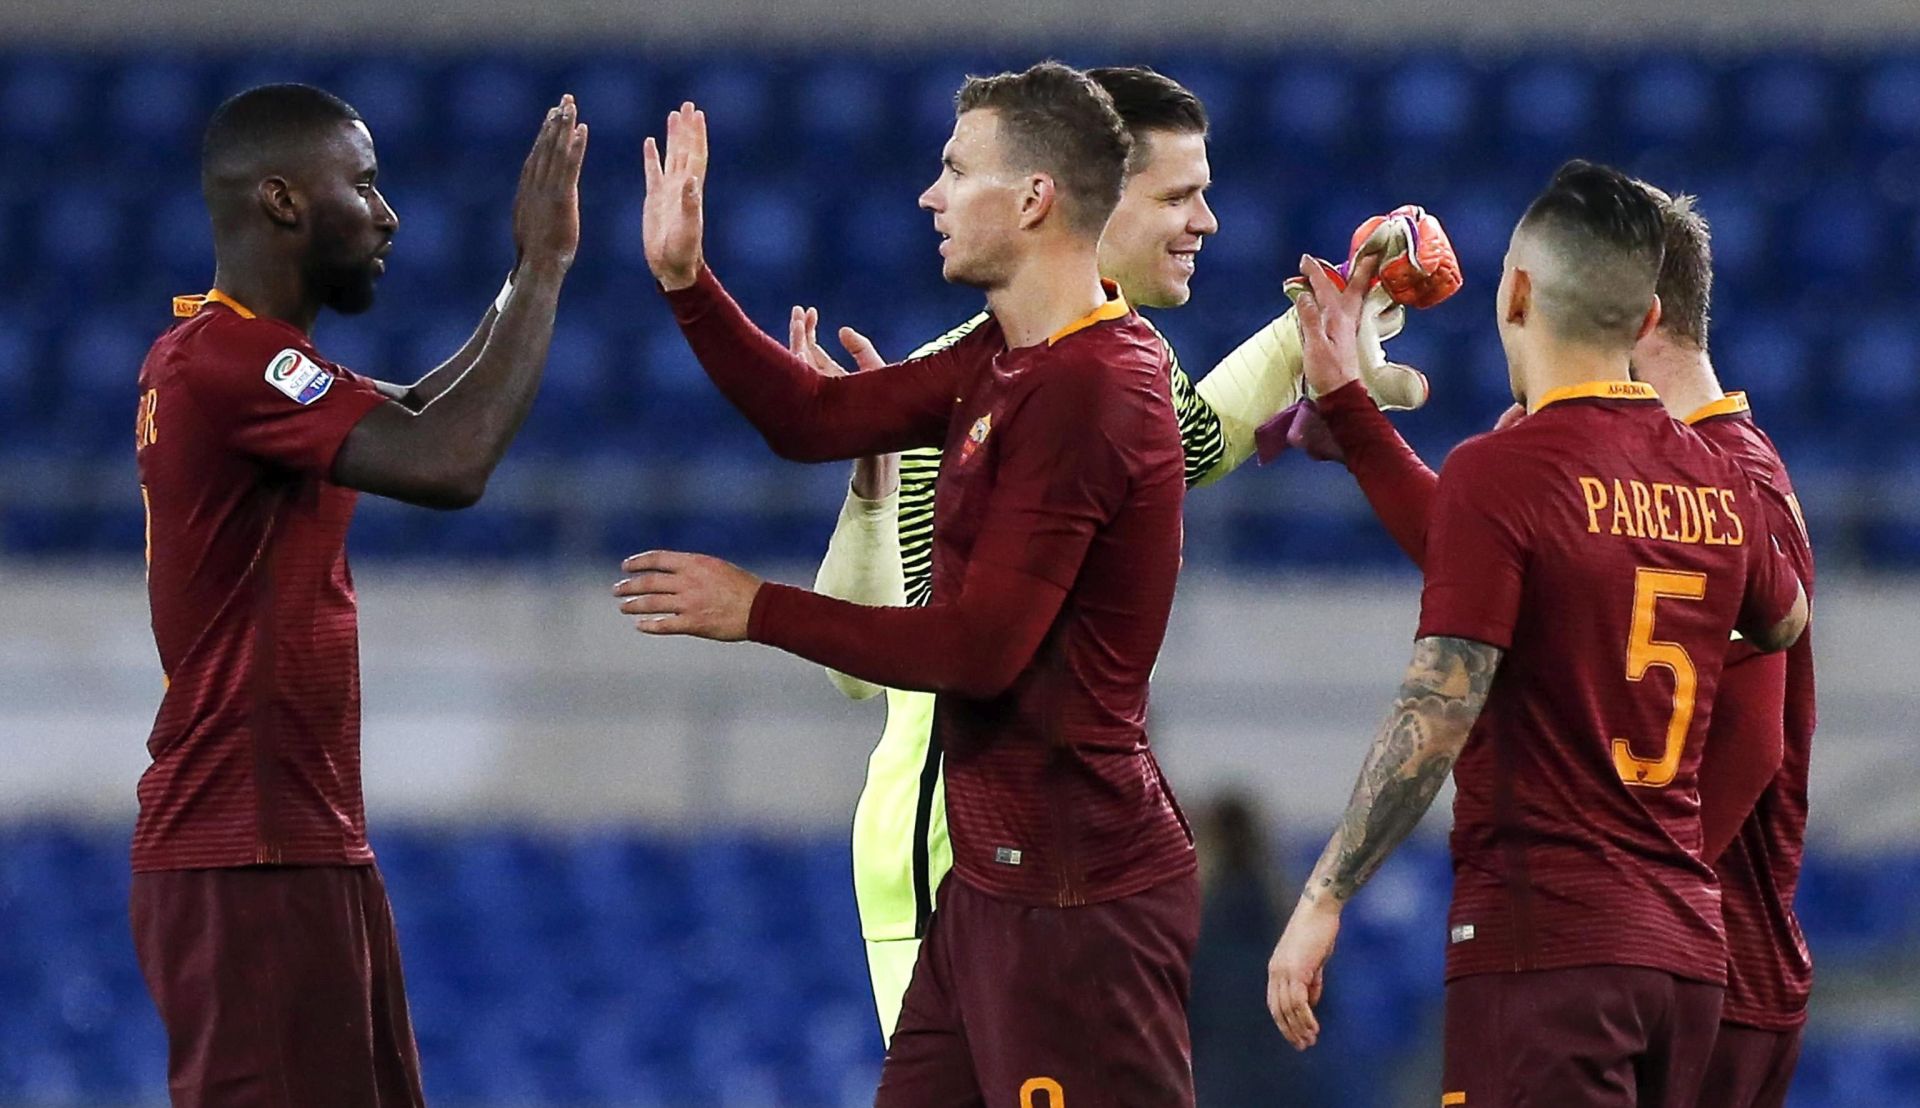 epa05742651 Romas players celebrate the victory at the end of the Italian Serie A soccer match AS Roma vs Cagliari Calcio at Olimpico stadium in Rome, Italy, 22 January 2017.  EPA/ANGELO CARCONI